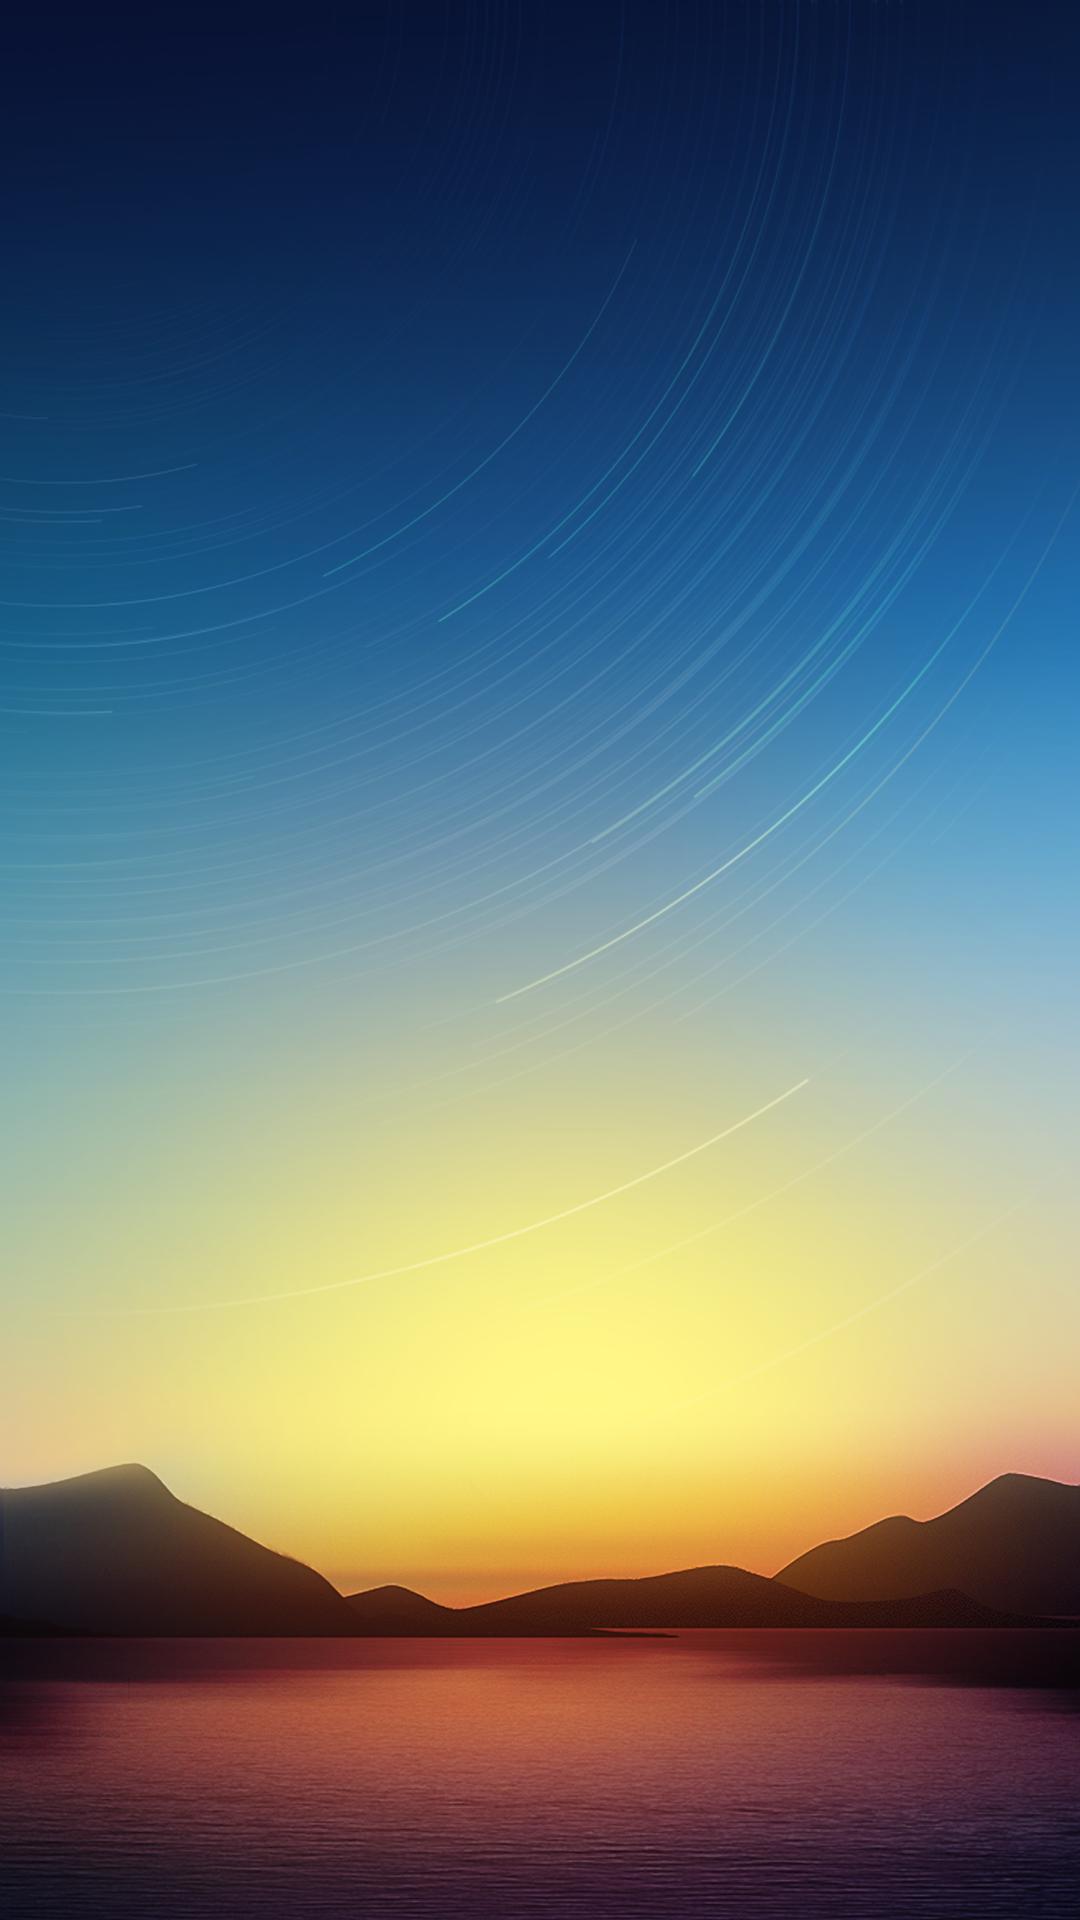 Upgrade Your Screen Size with These Large Phone Backgrounds